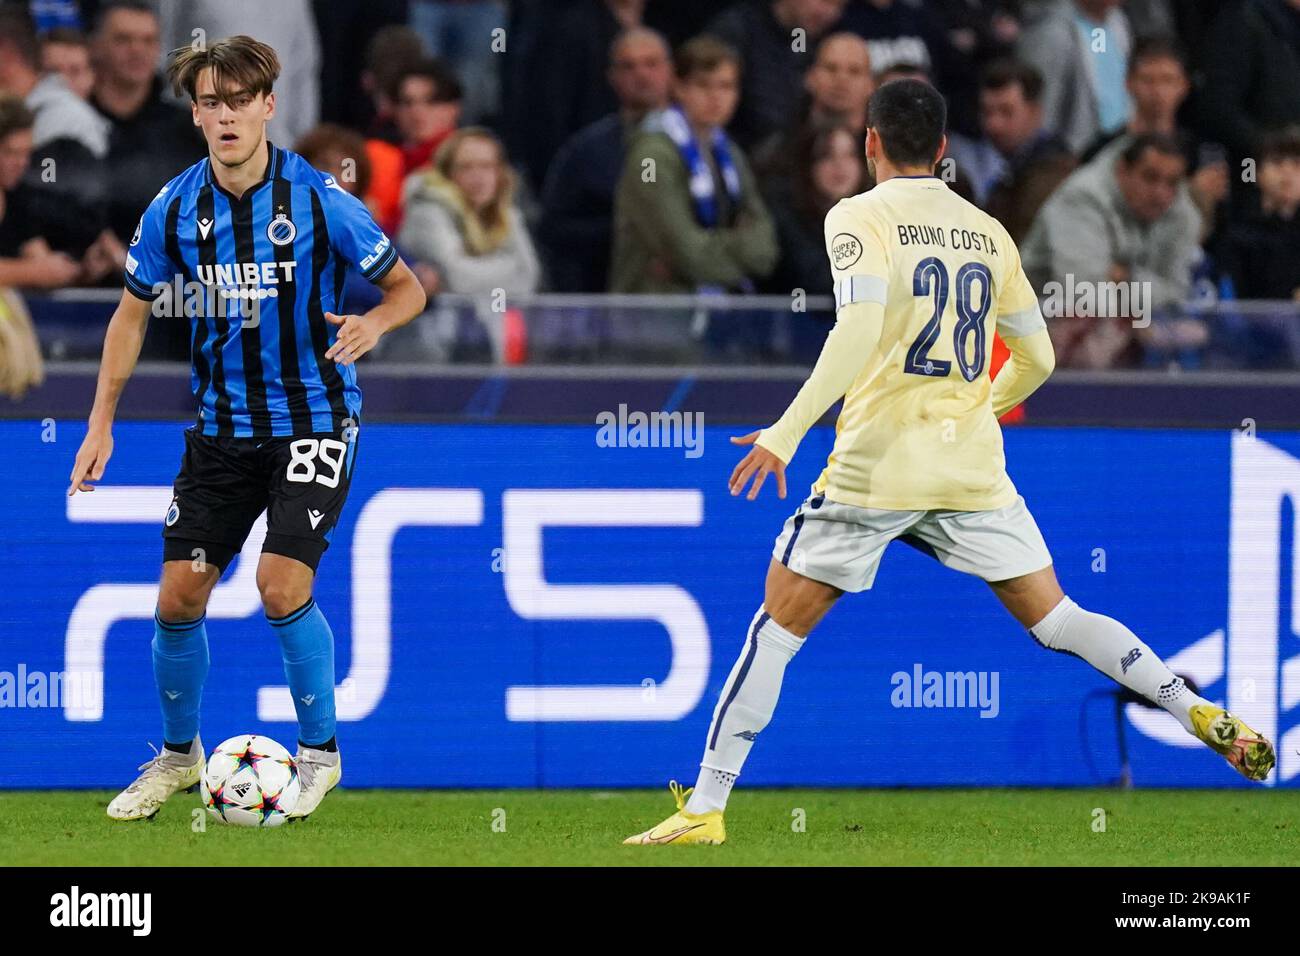 BRUGES, BELGIUM - OCTOBER 26: Lynnt Audoor of Club Brugge KV battles for the ball with Bruno Costa of FC Porto during the Group B - UEFA Champions League match between Club Brugge KV and FC Porto at the Jan Breydelstadion on October 26, 2022 in Bruges, Belgium (Photo by Joris Verwijst/Orange Pictures) Stock Photo